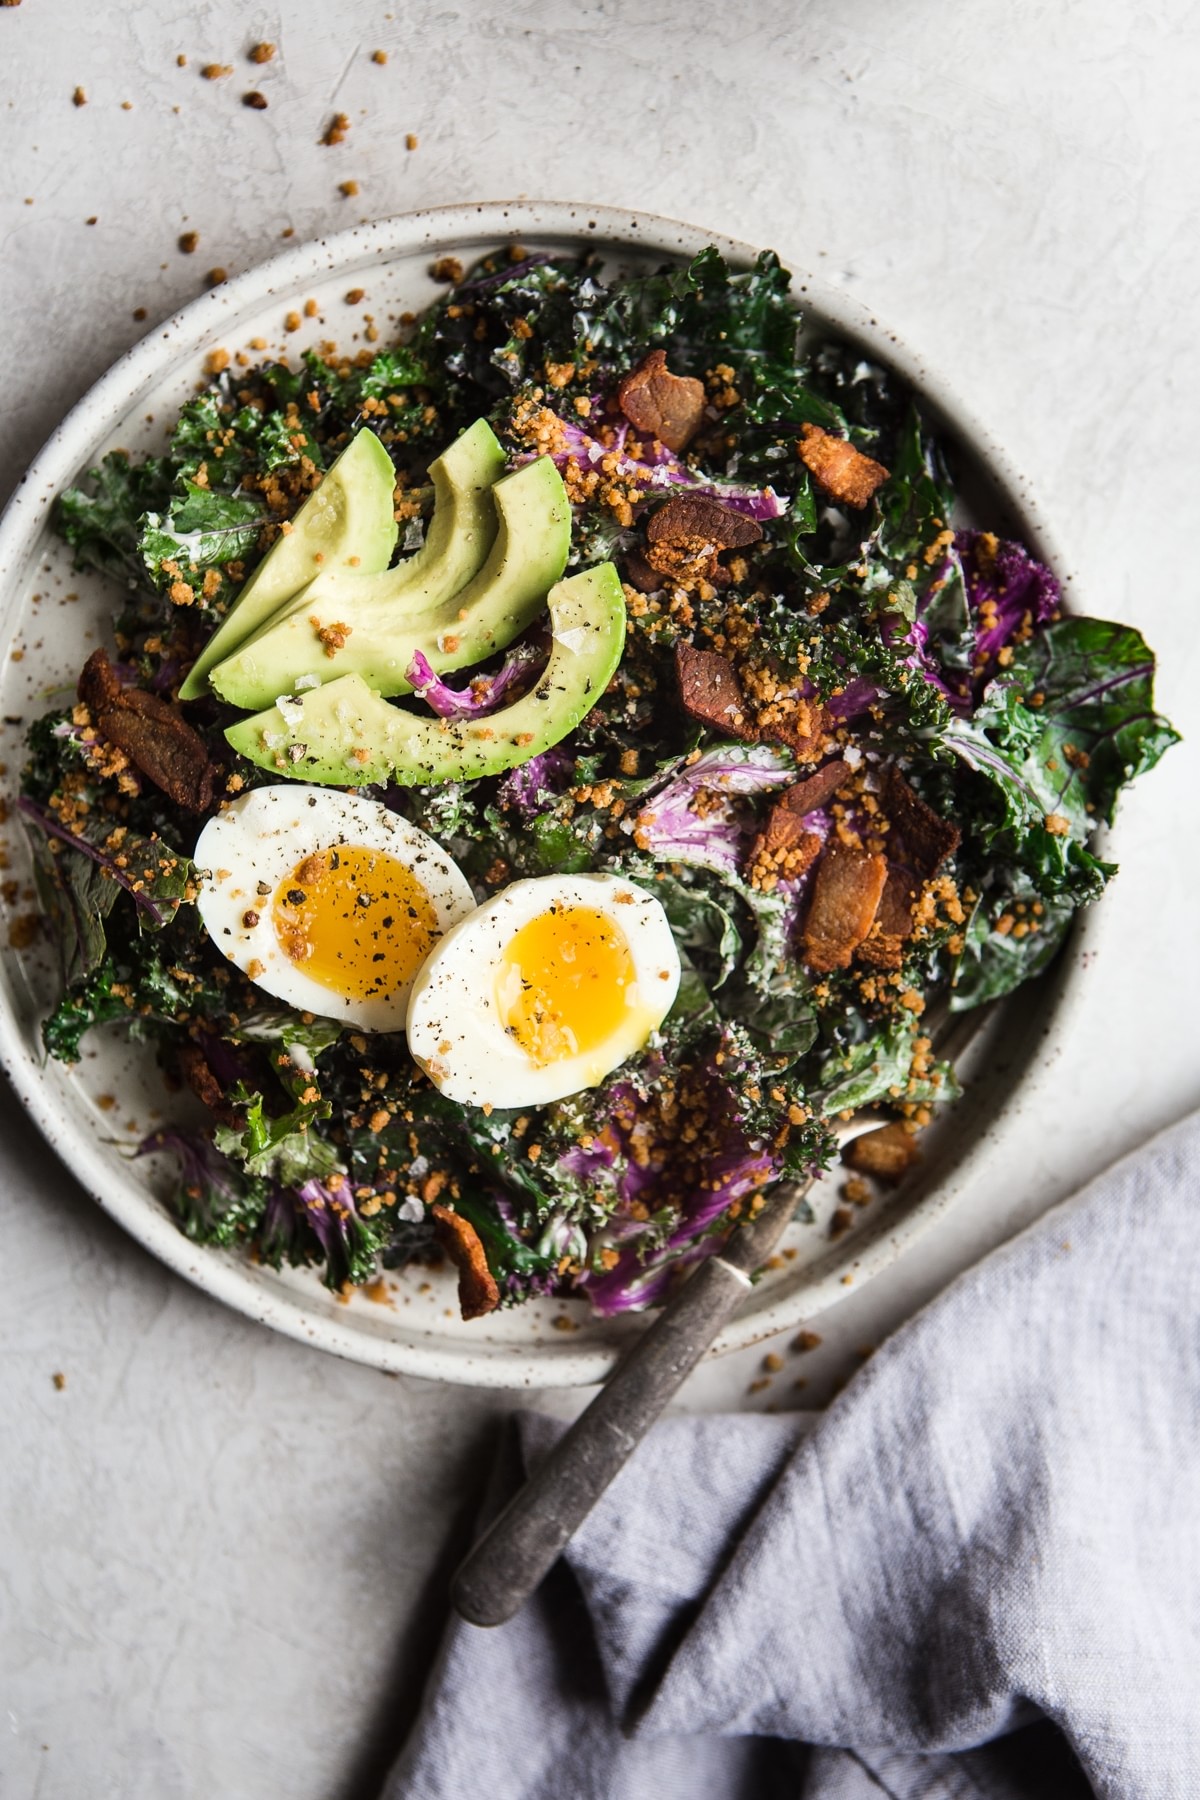 whole 30 kale caesar salad with avocado, bacon and soft boiled egg on a plate